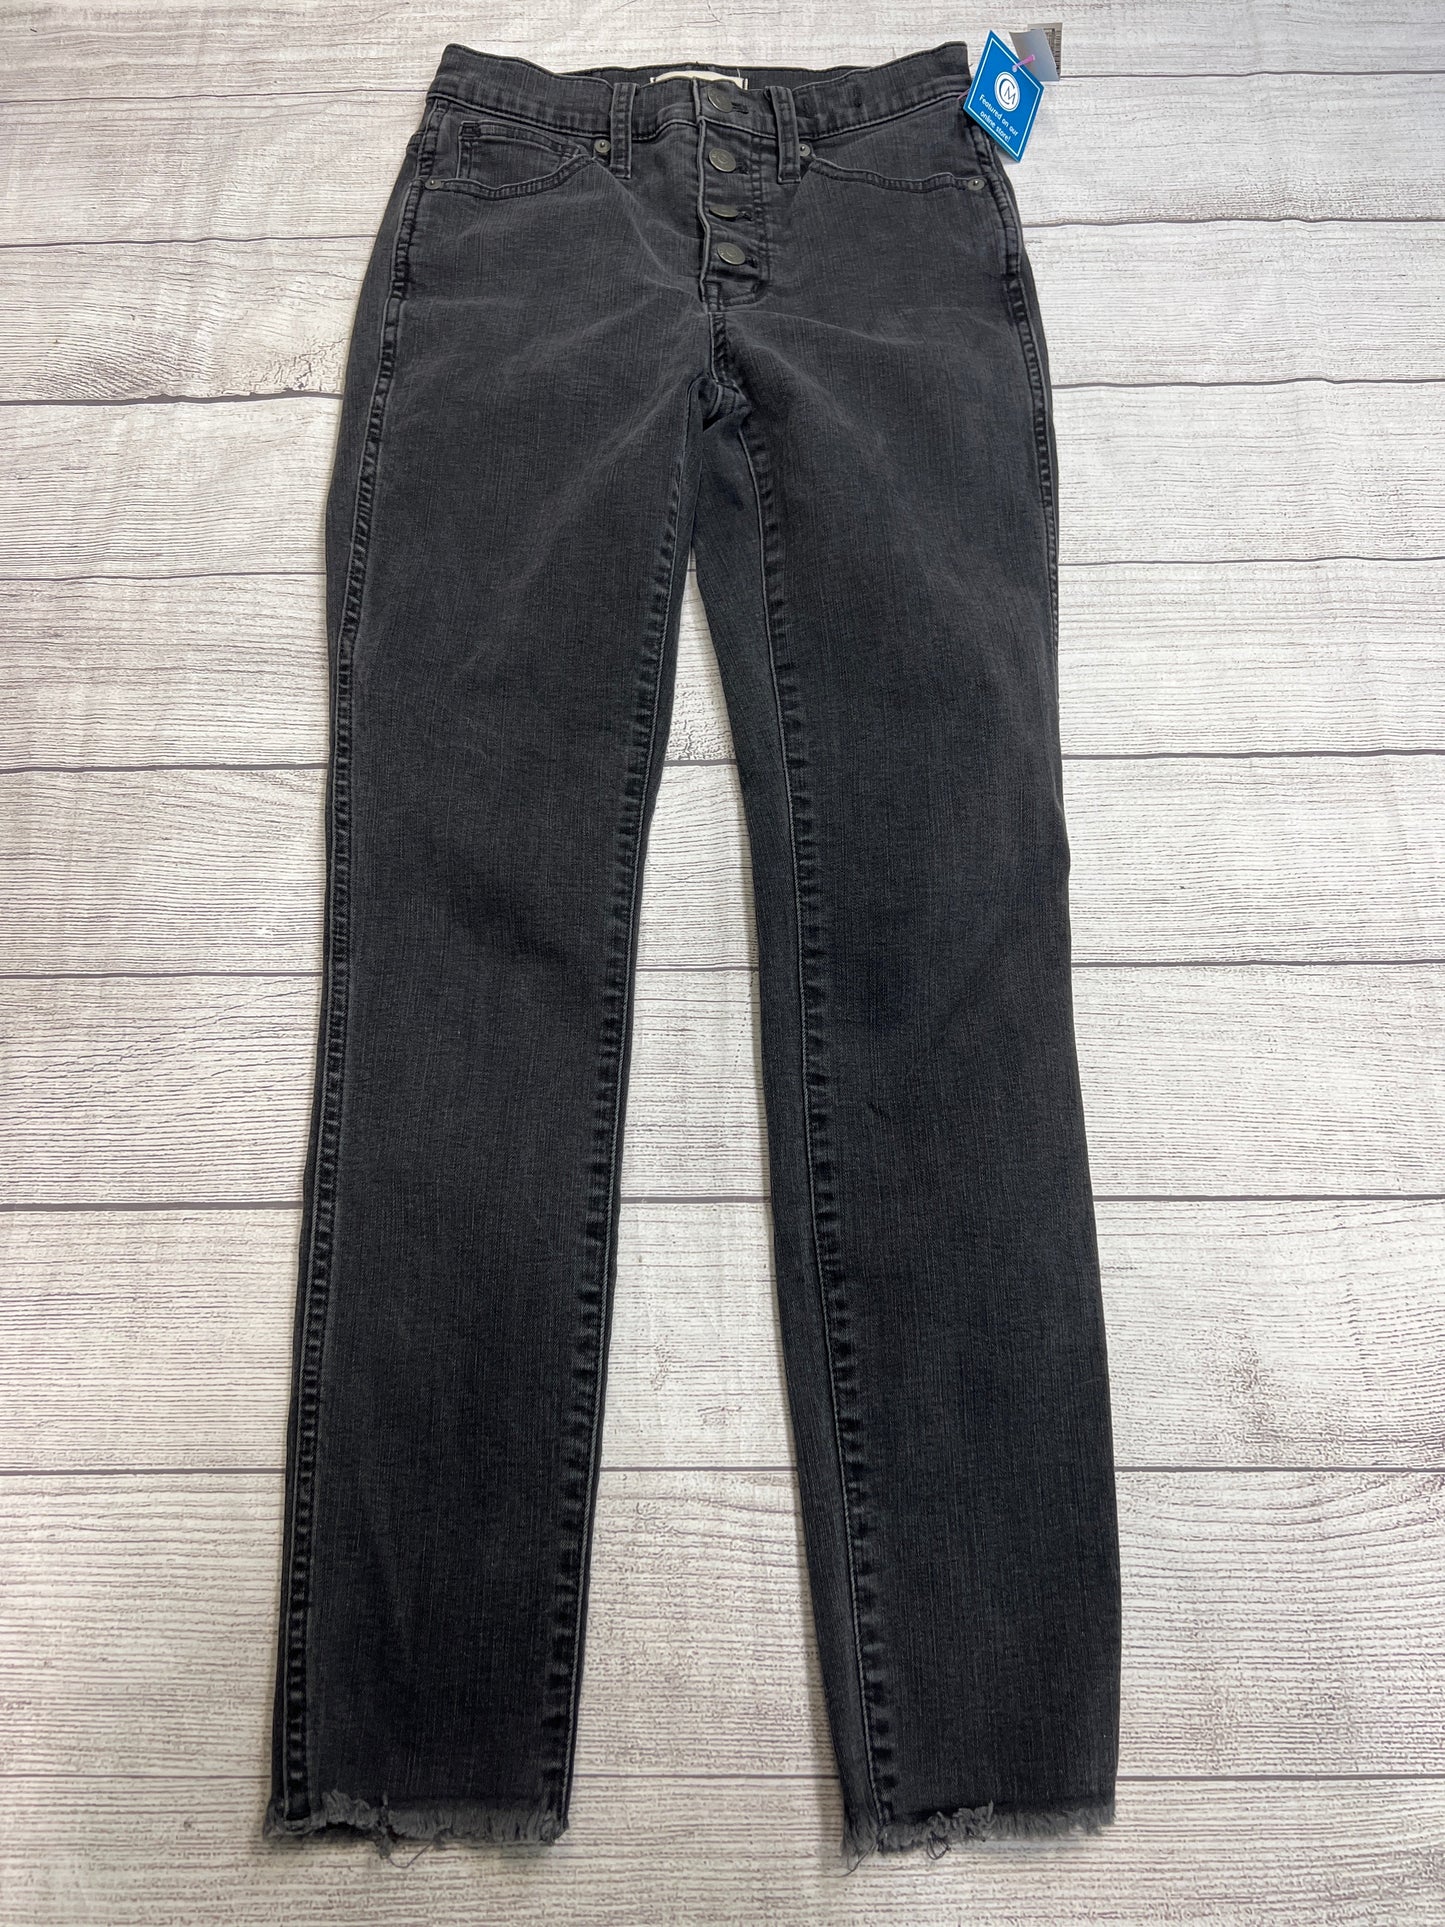 Jeans Skinny By Madewell  Size: 0/25